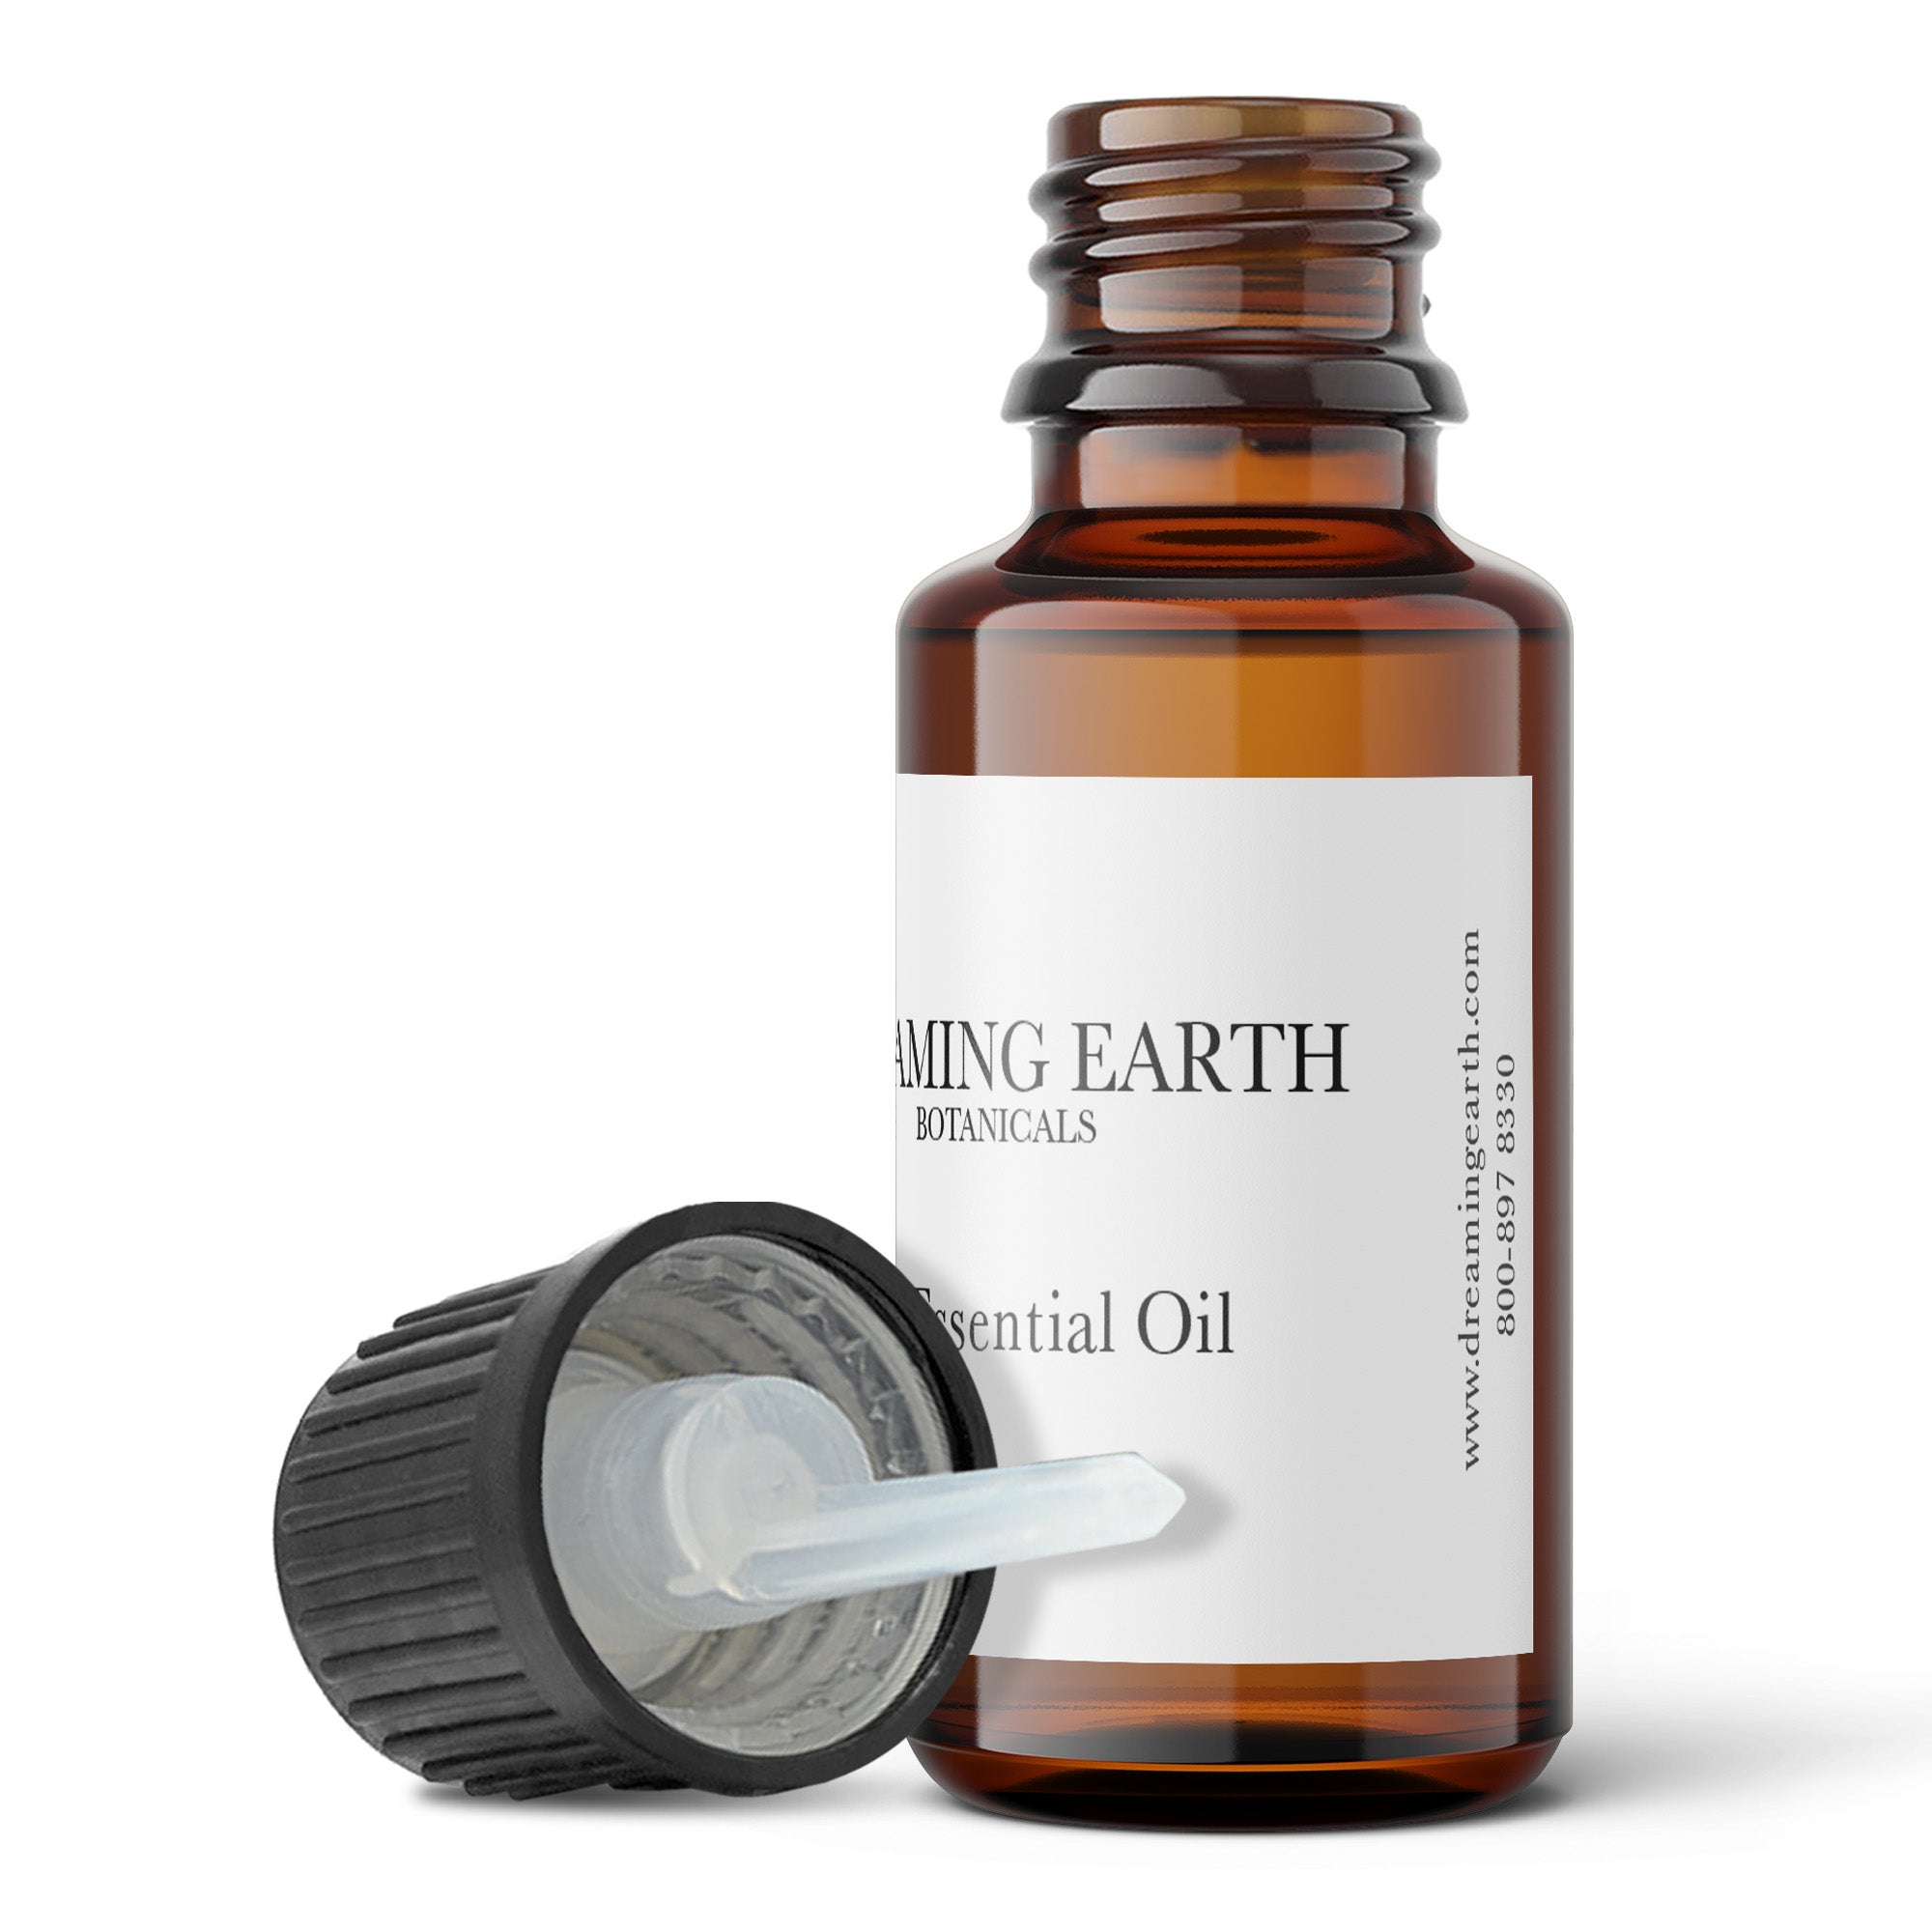 Load image into Gallery viewer, Rose Geranium Essential Oil - Dreaming Earth Inc
